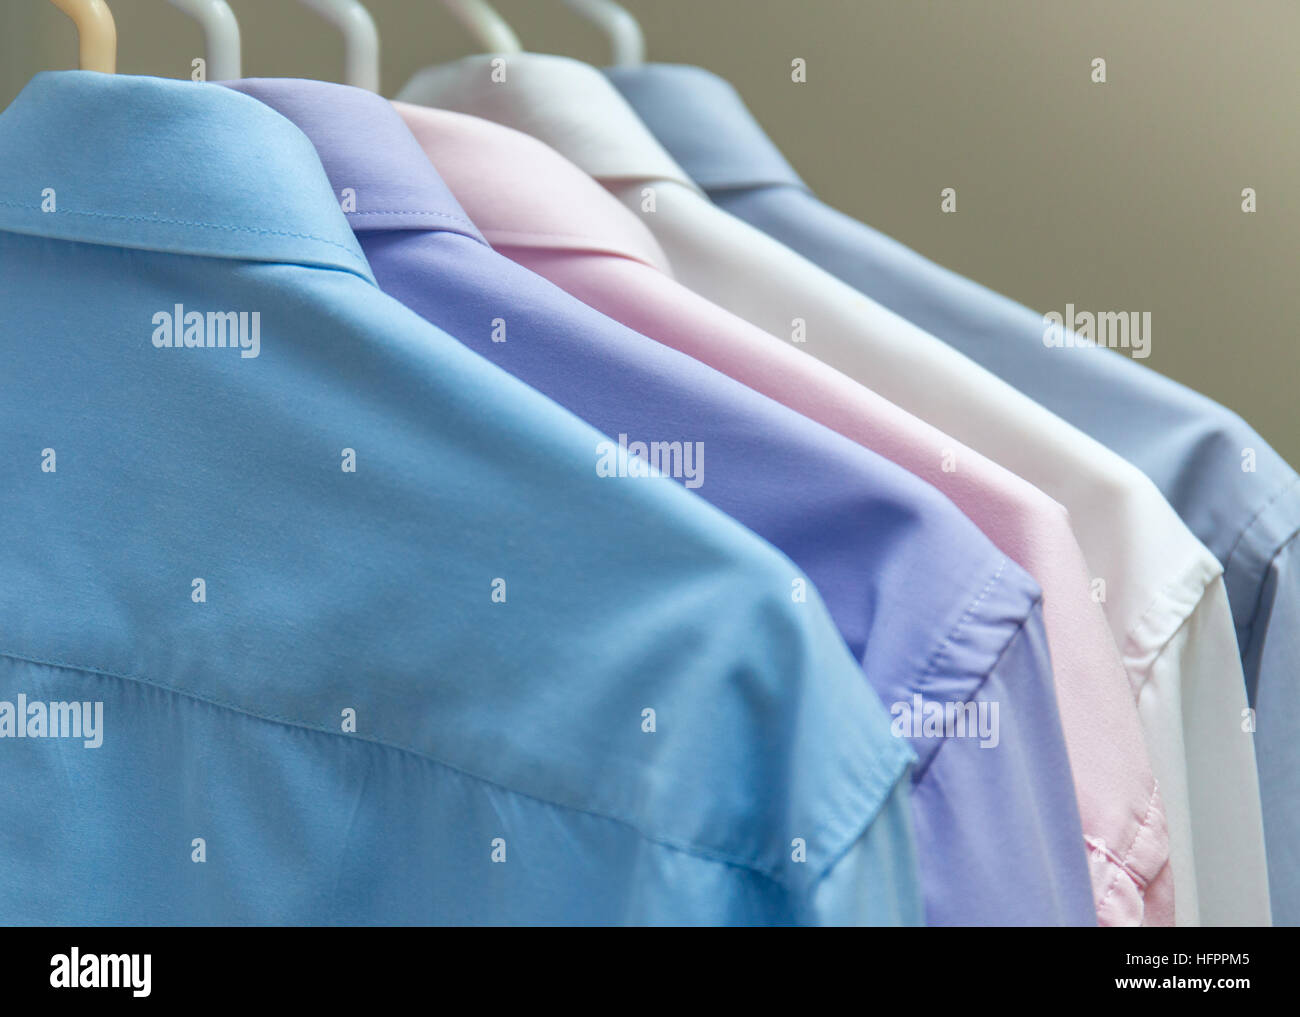 bright men's shirts hanging on hangers  gray background Stock Photo